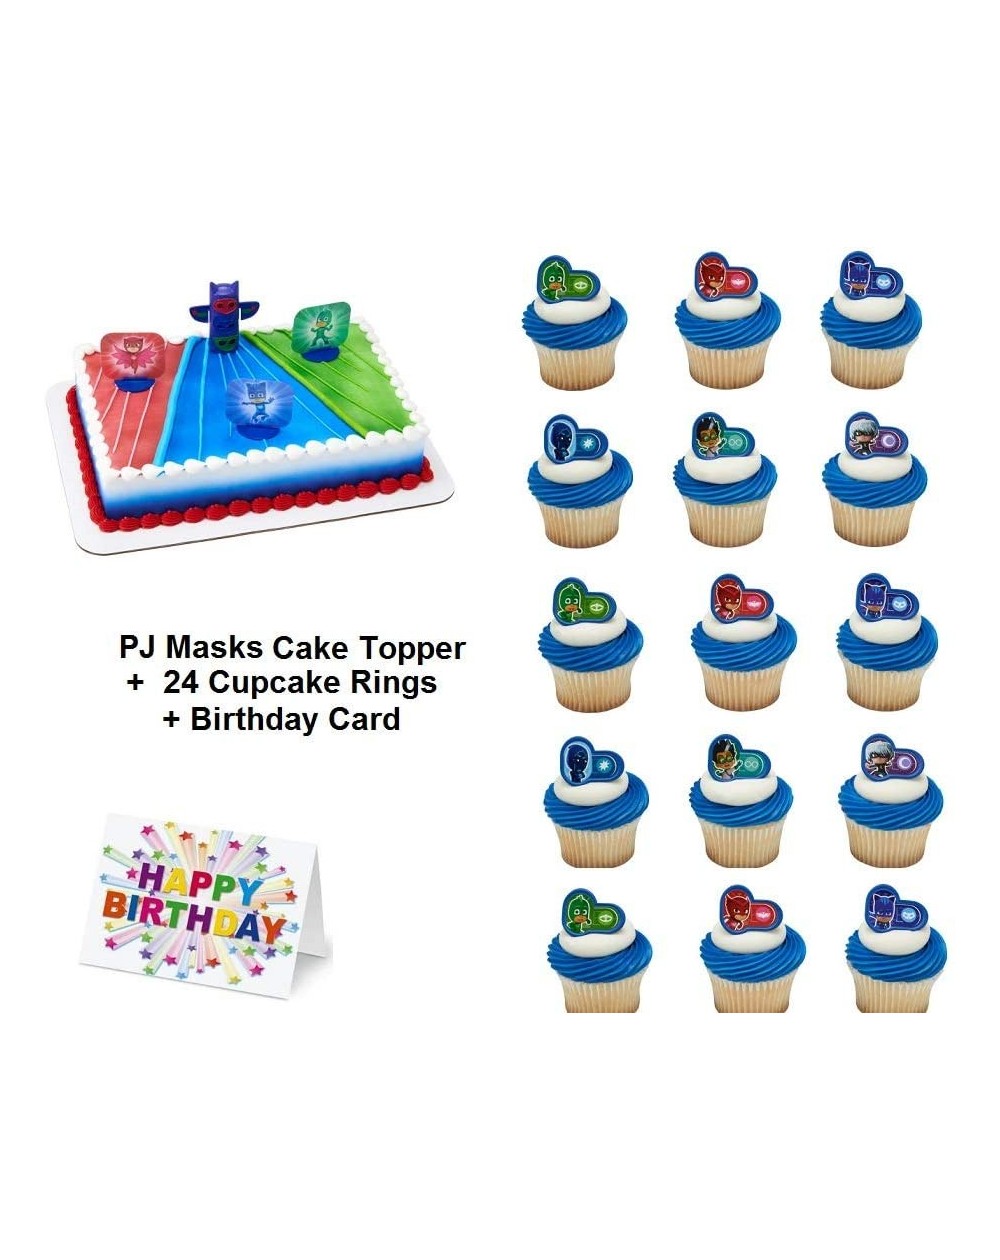 Cake & Cupcake Toppers Mask PJ Cake Topper Licensed Heroes Set Cupcake 24 Pieces Birthday Supplies Favors Goodies Plus Birthd...